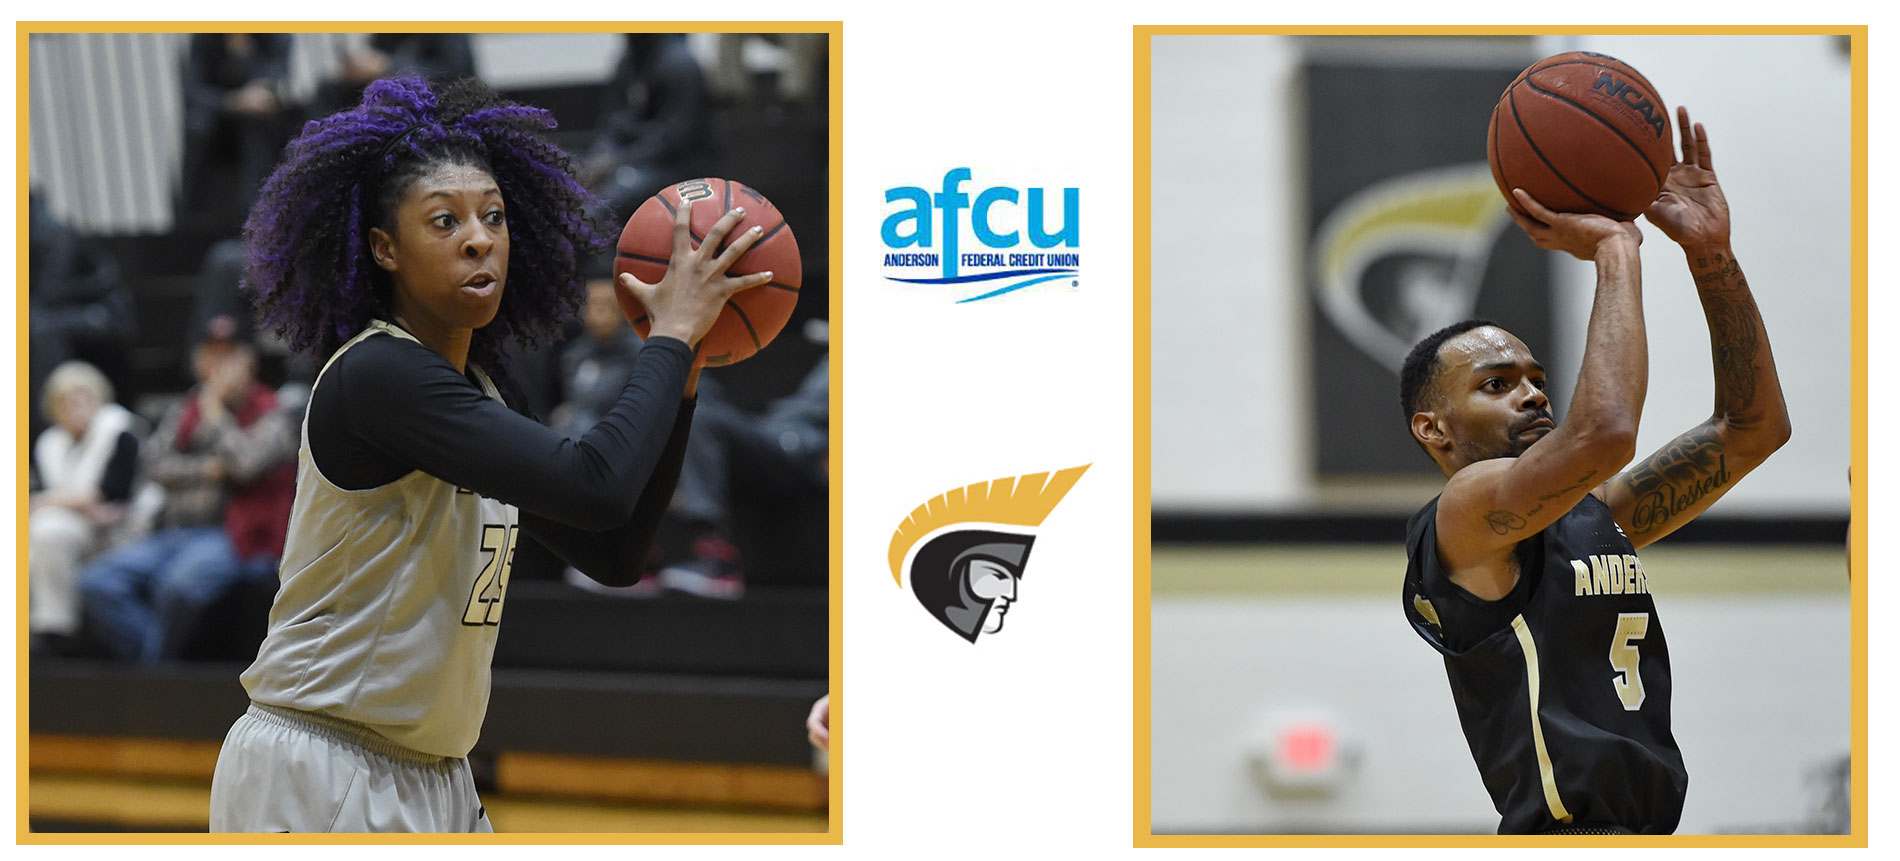 Women’s Basketball’s Alexis Dillard and Men’s Basketball’s Gage Ellis Named to the AFCU Gold Standard